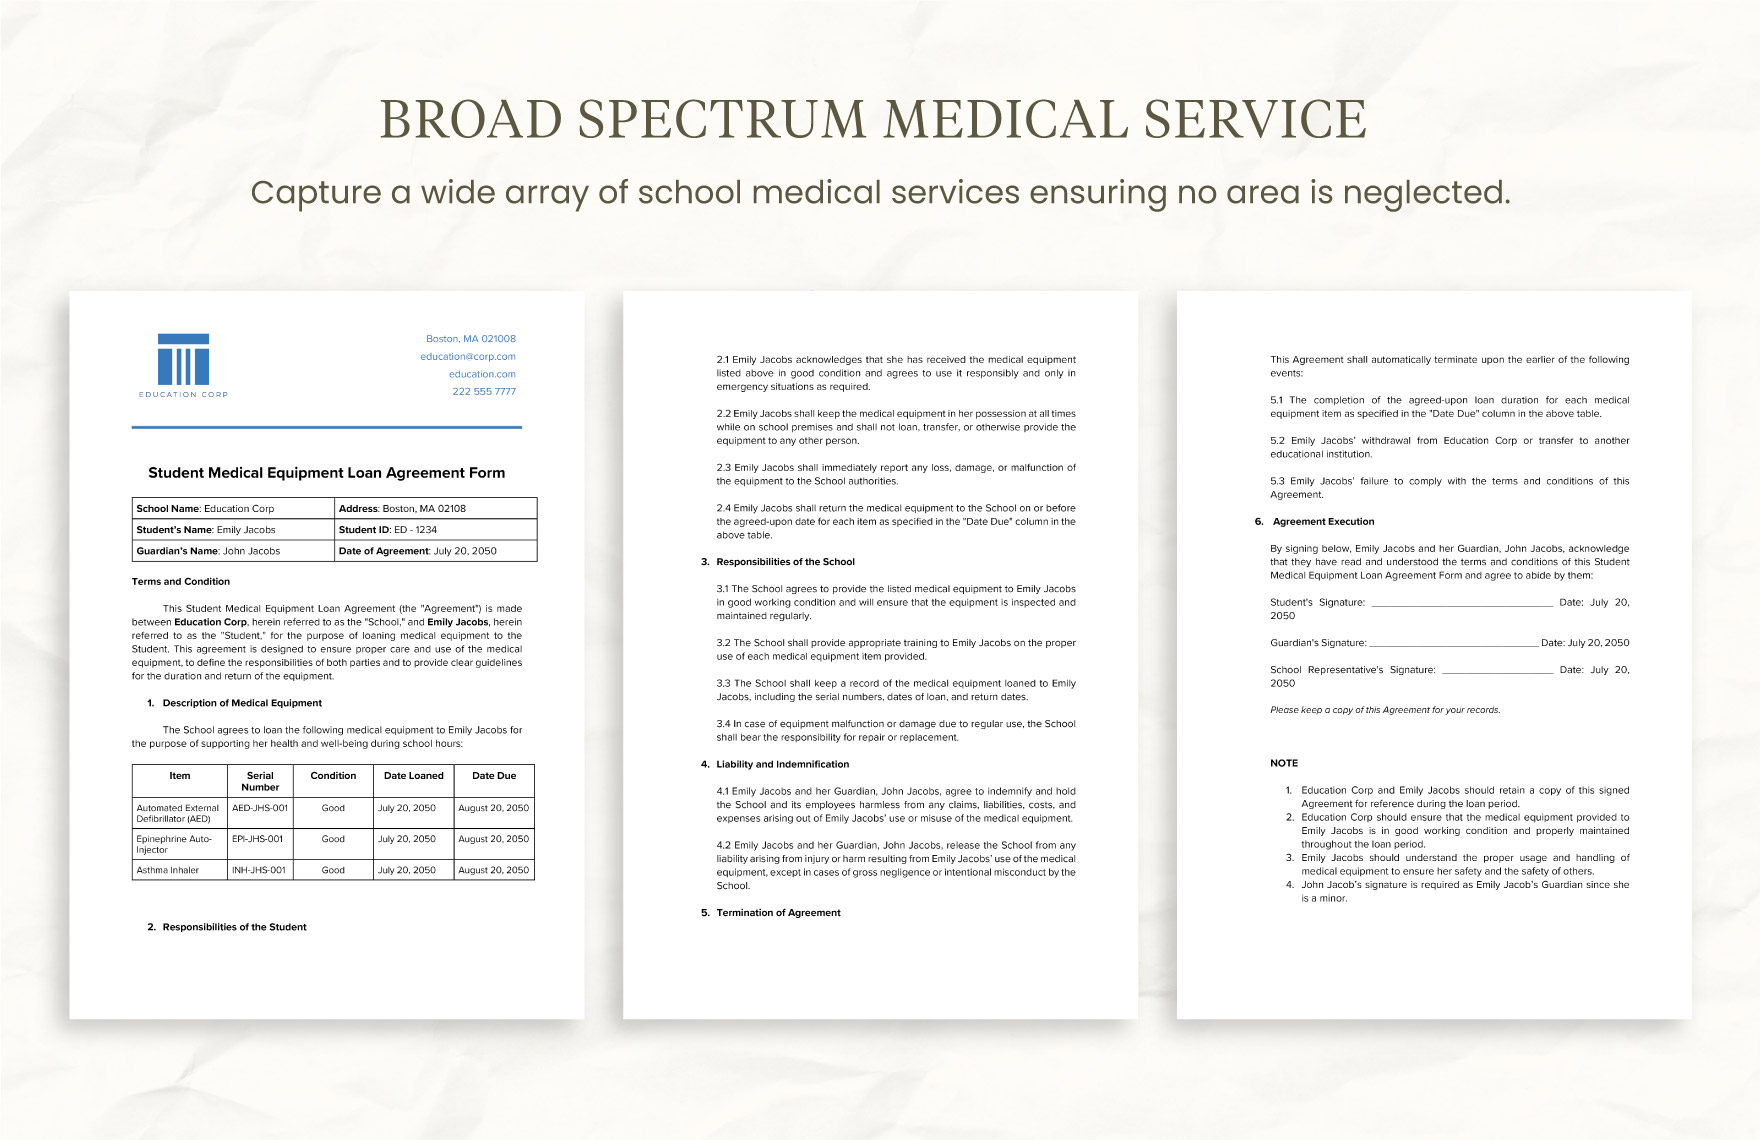 Student Medical Equipment Loan Agreement Form Template